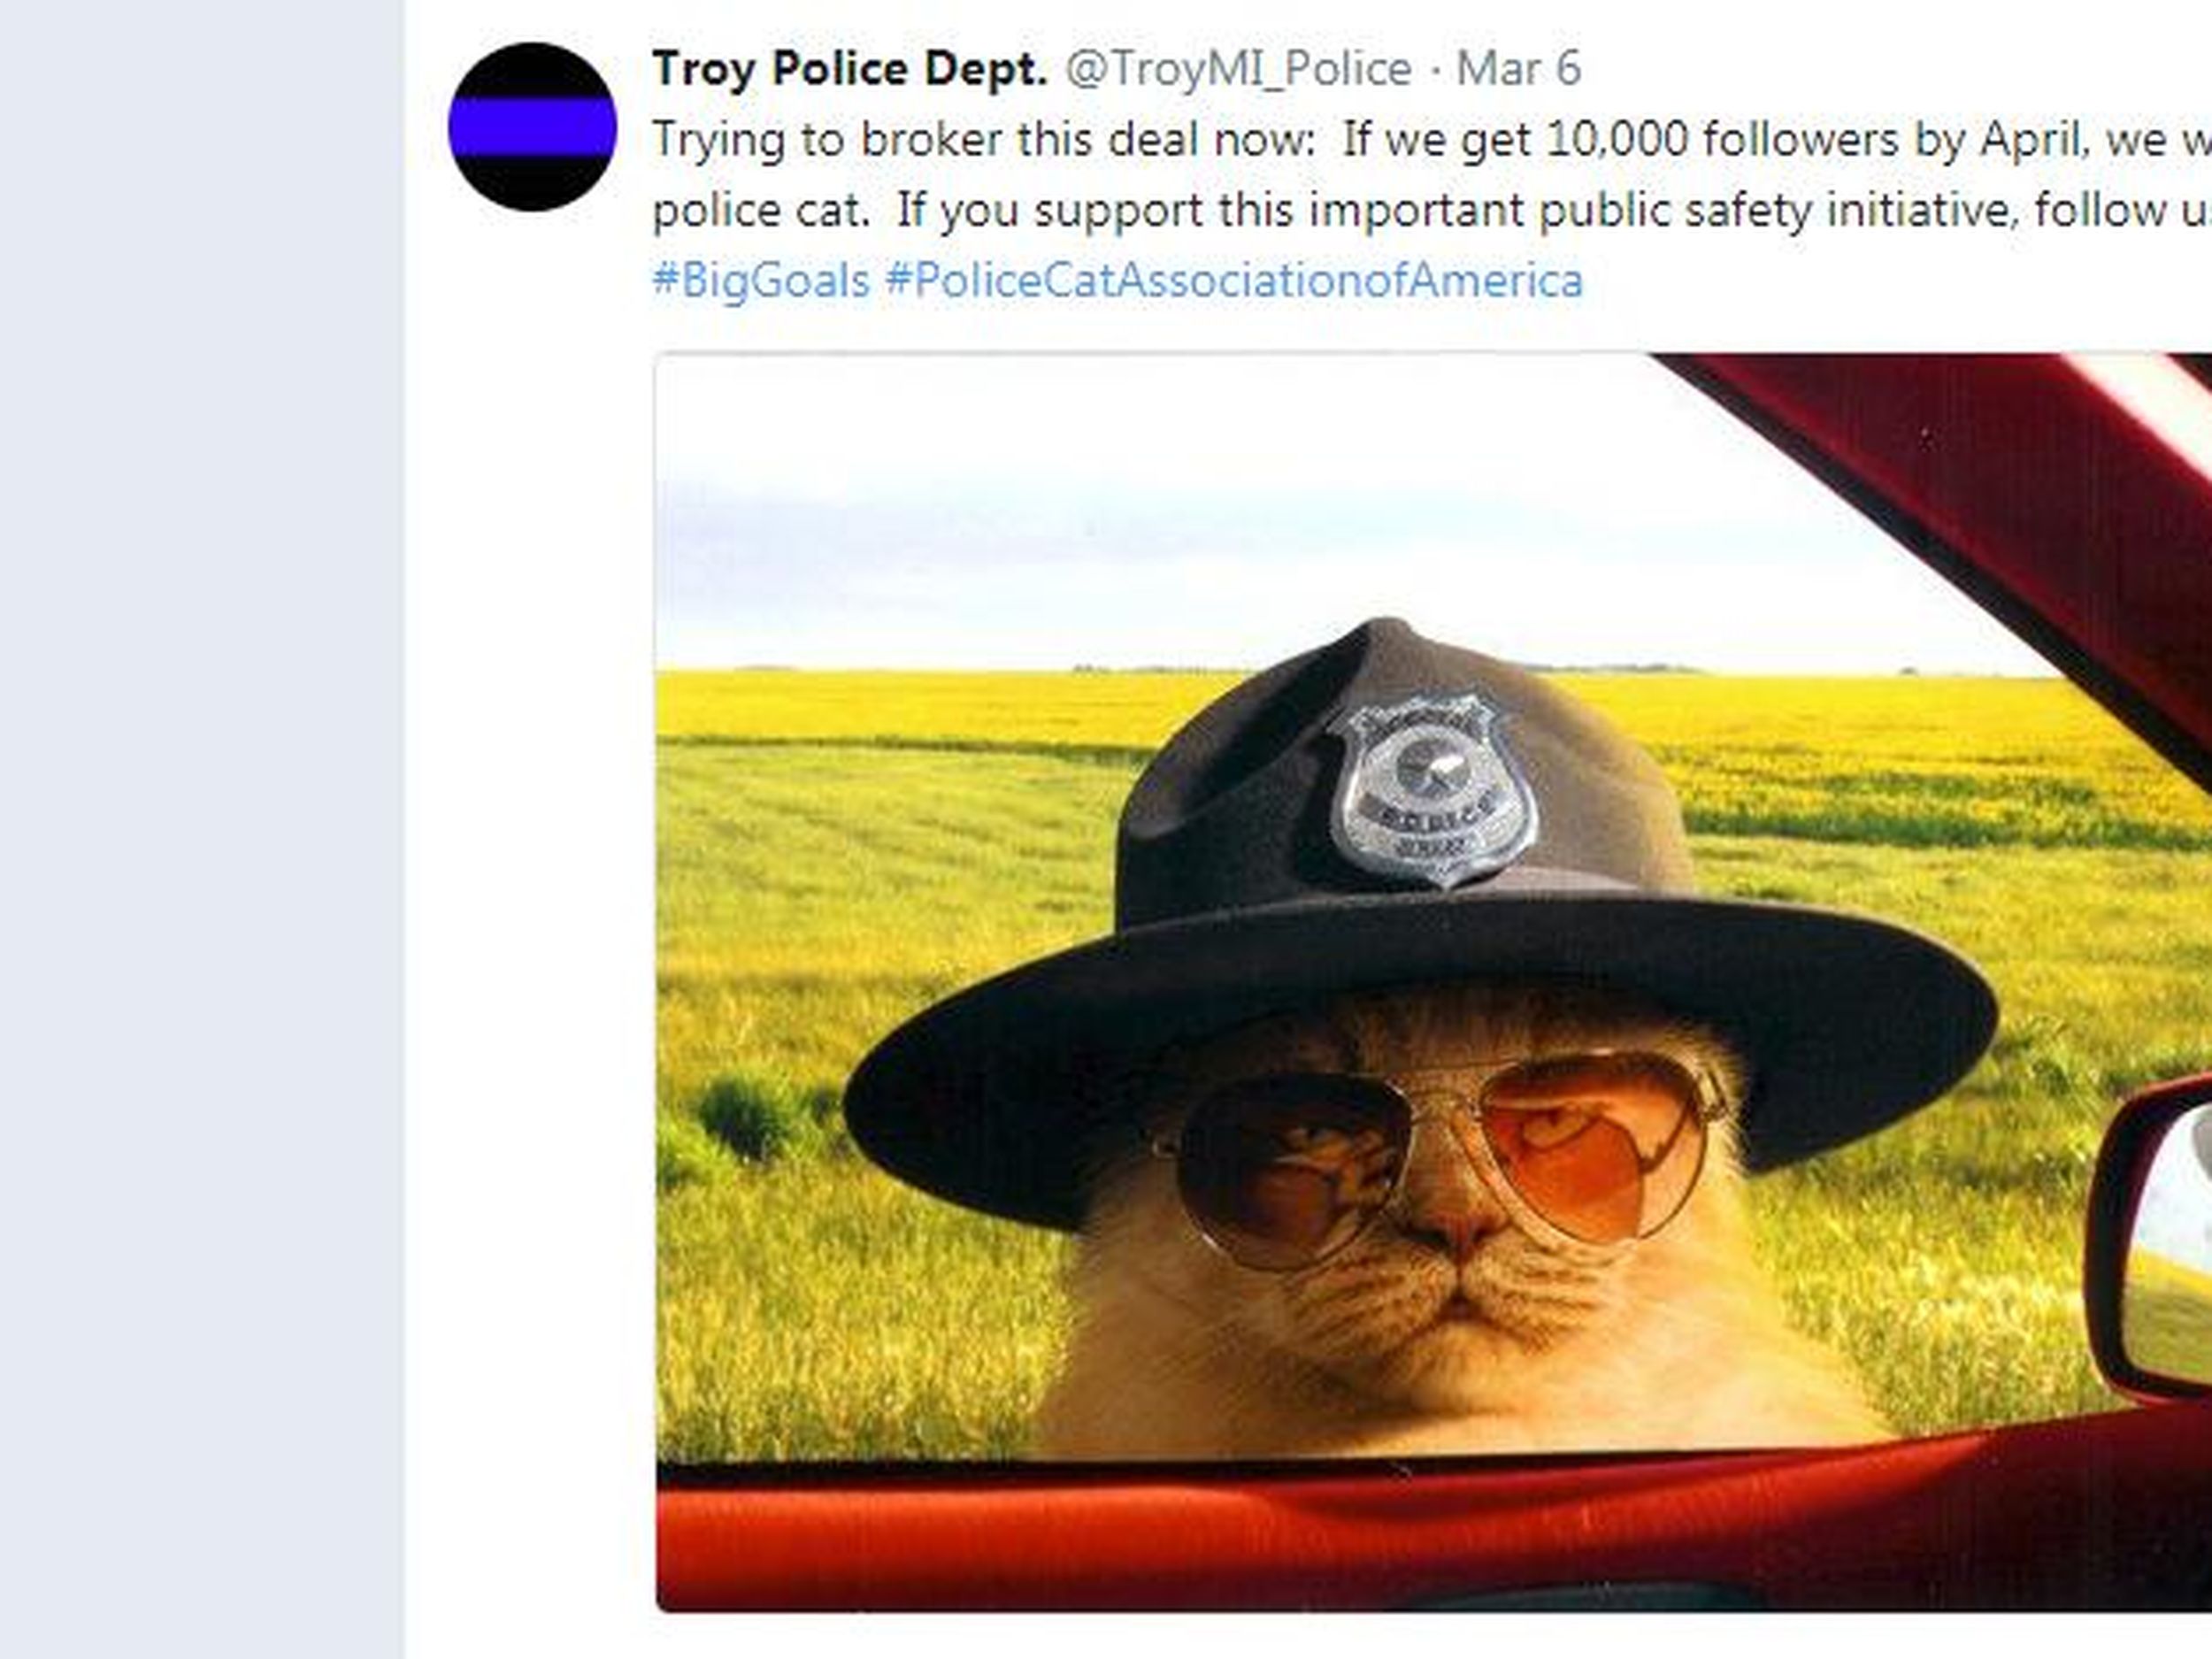 10K: Troy Police Department to get police cat